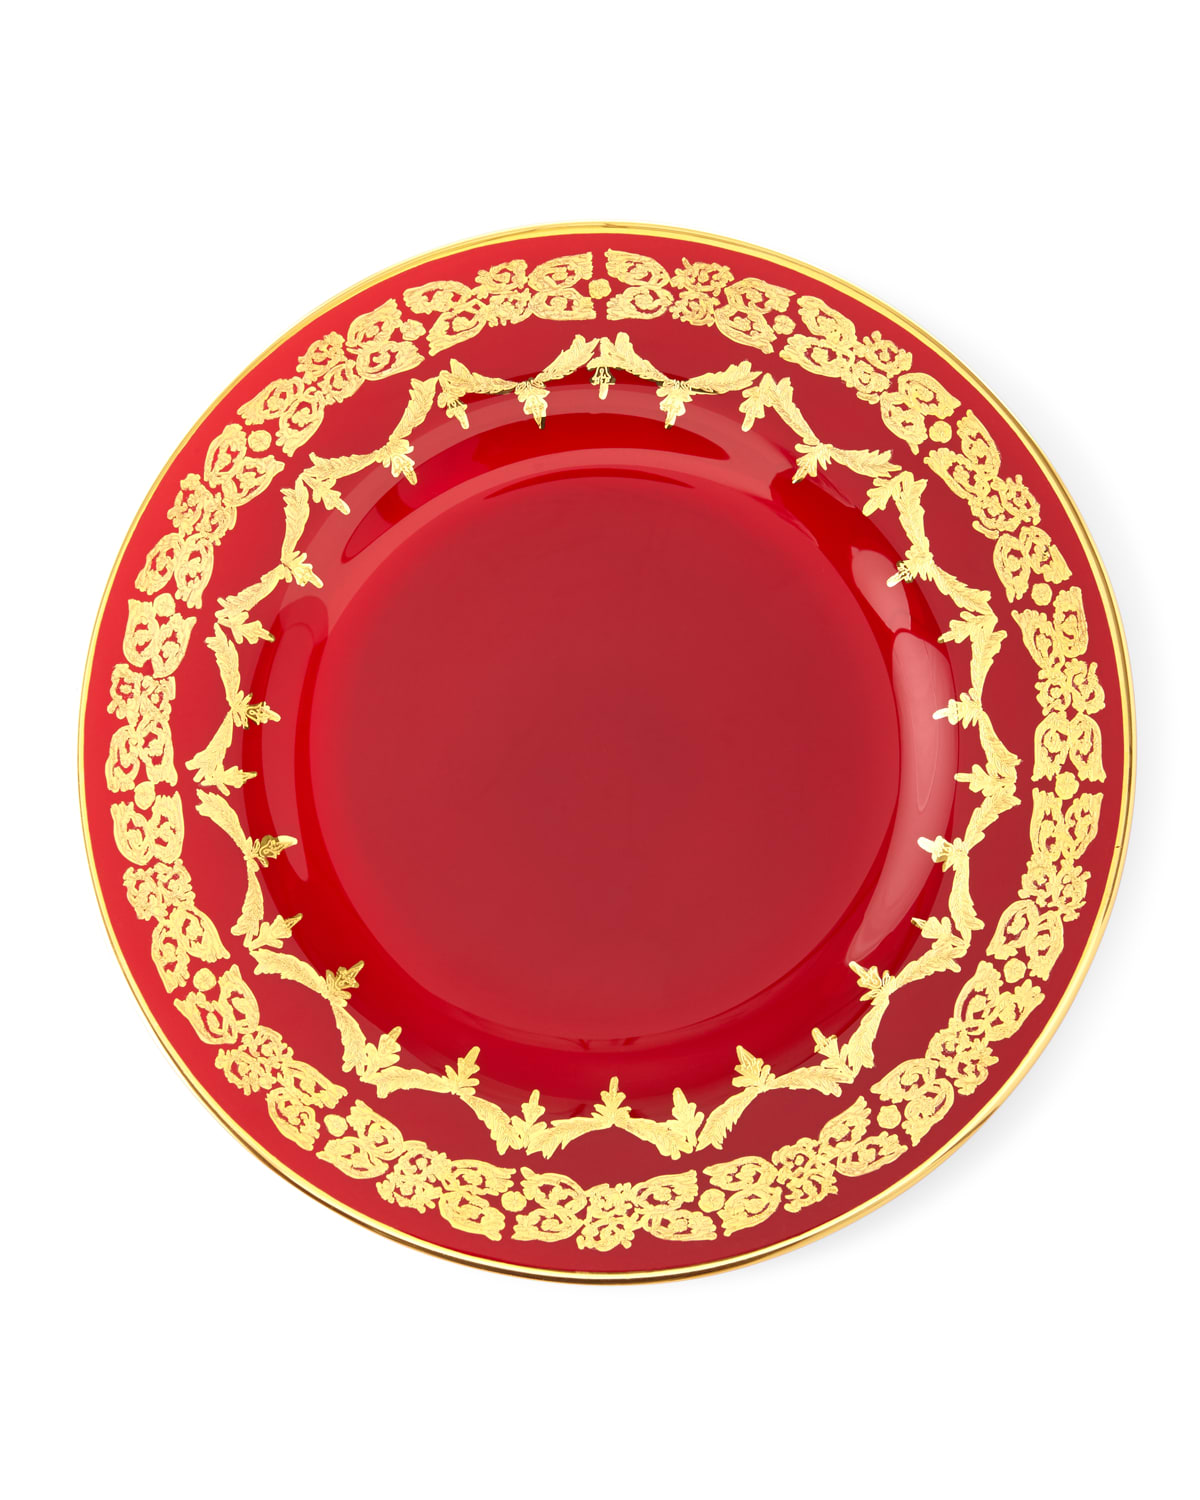 Image Neiman Marcus Red Oro Bello Dinner Plate, Set of 4